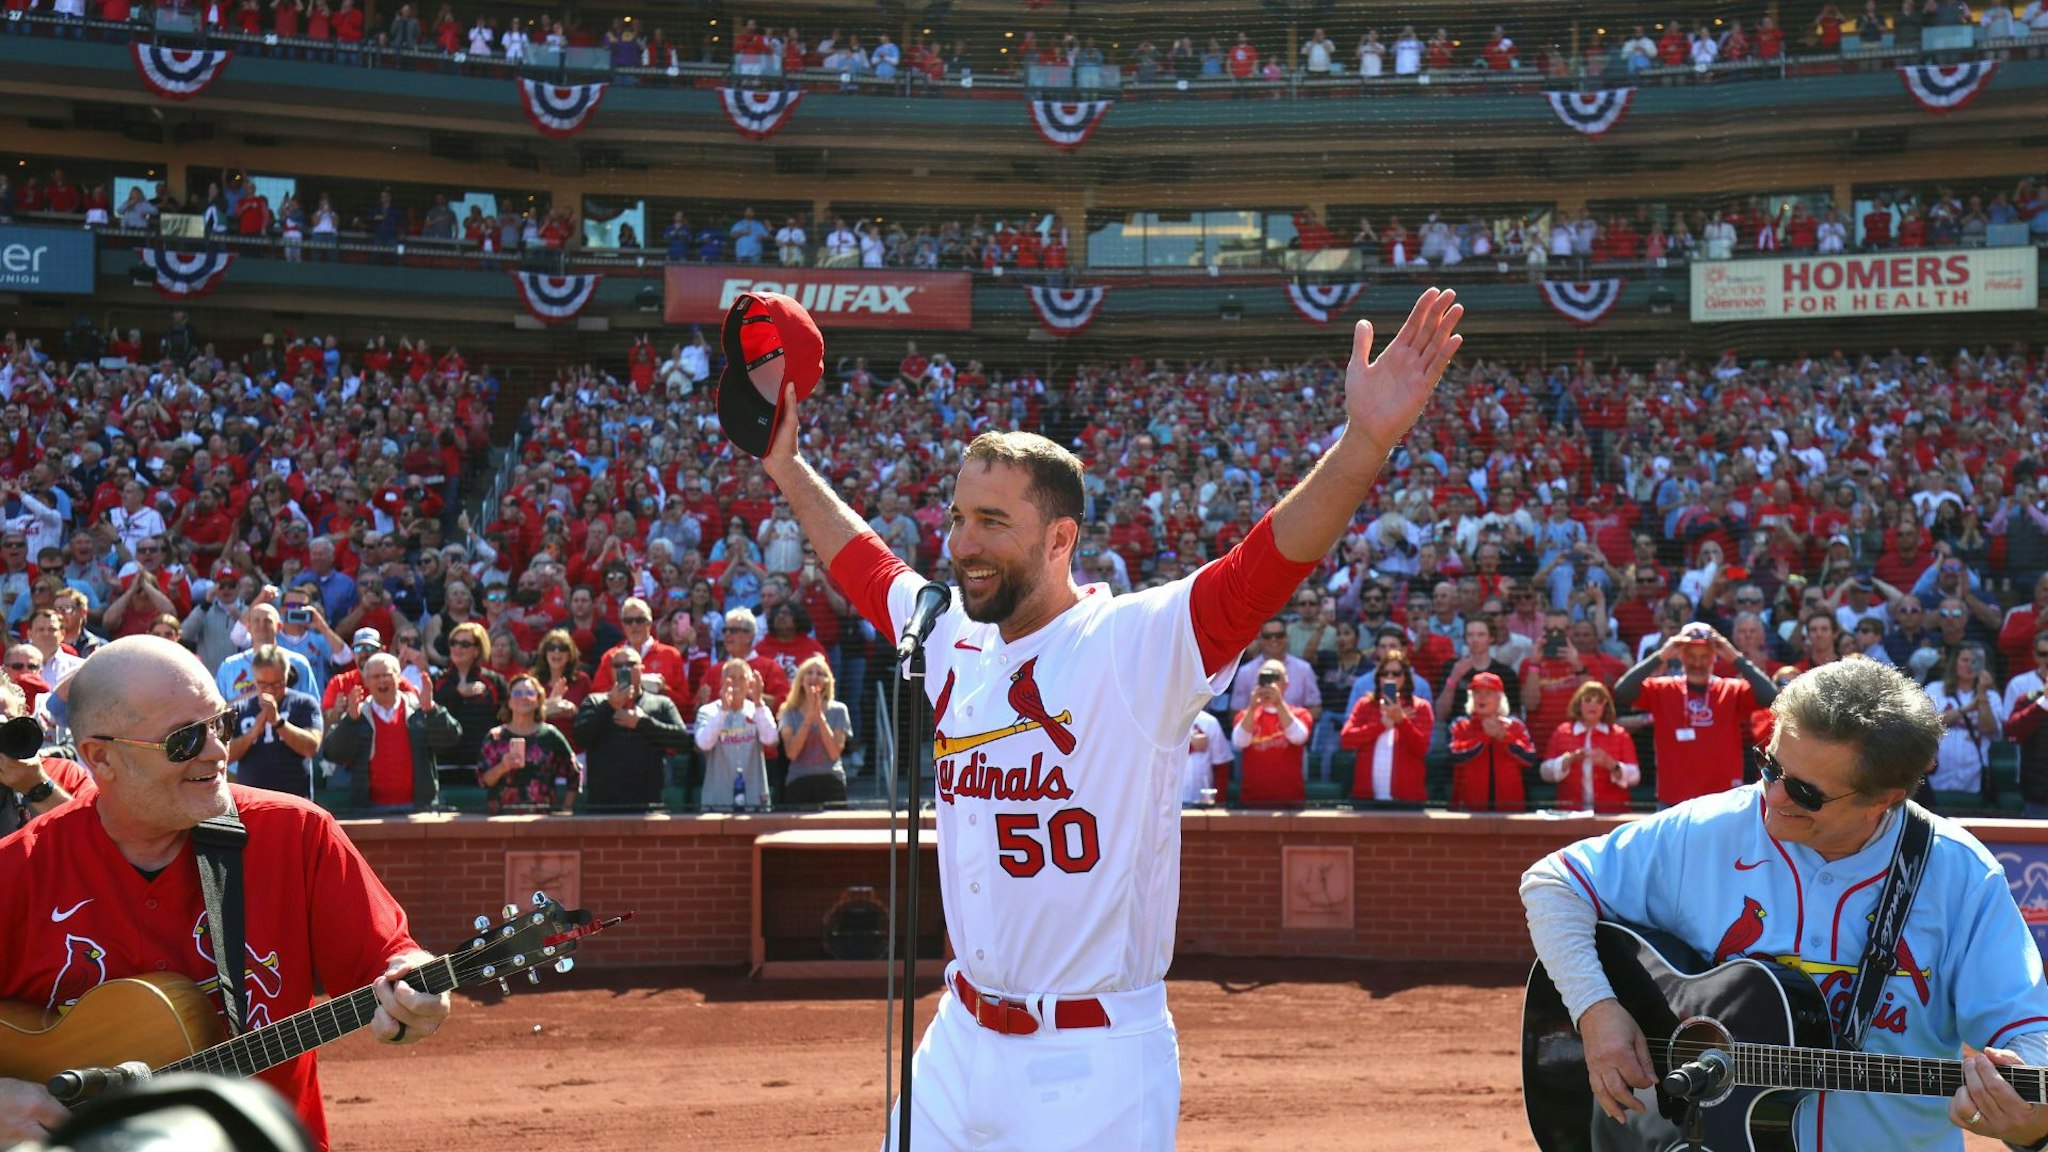 (ST. LOUIS, MO - MARCH 30: Adam Wainwright #50 of the St. Louis Cardinals sings the national anthem prior to the game between the Toronto Blue Jays and the St. Louis Cardinals at Busch Stadium on Thursday, March 30, 2023 in St. Louis, Missouri.